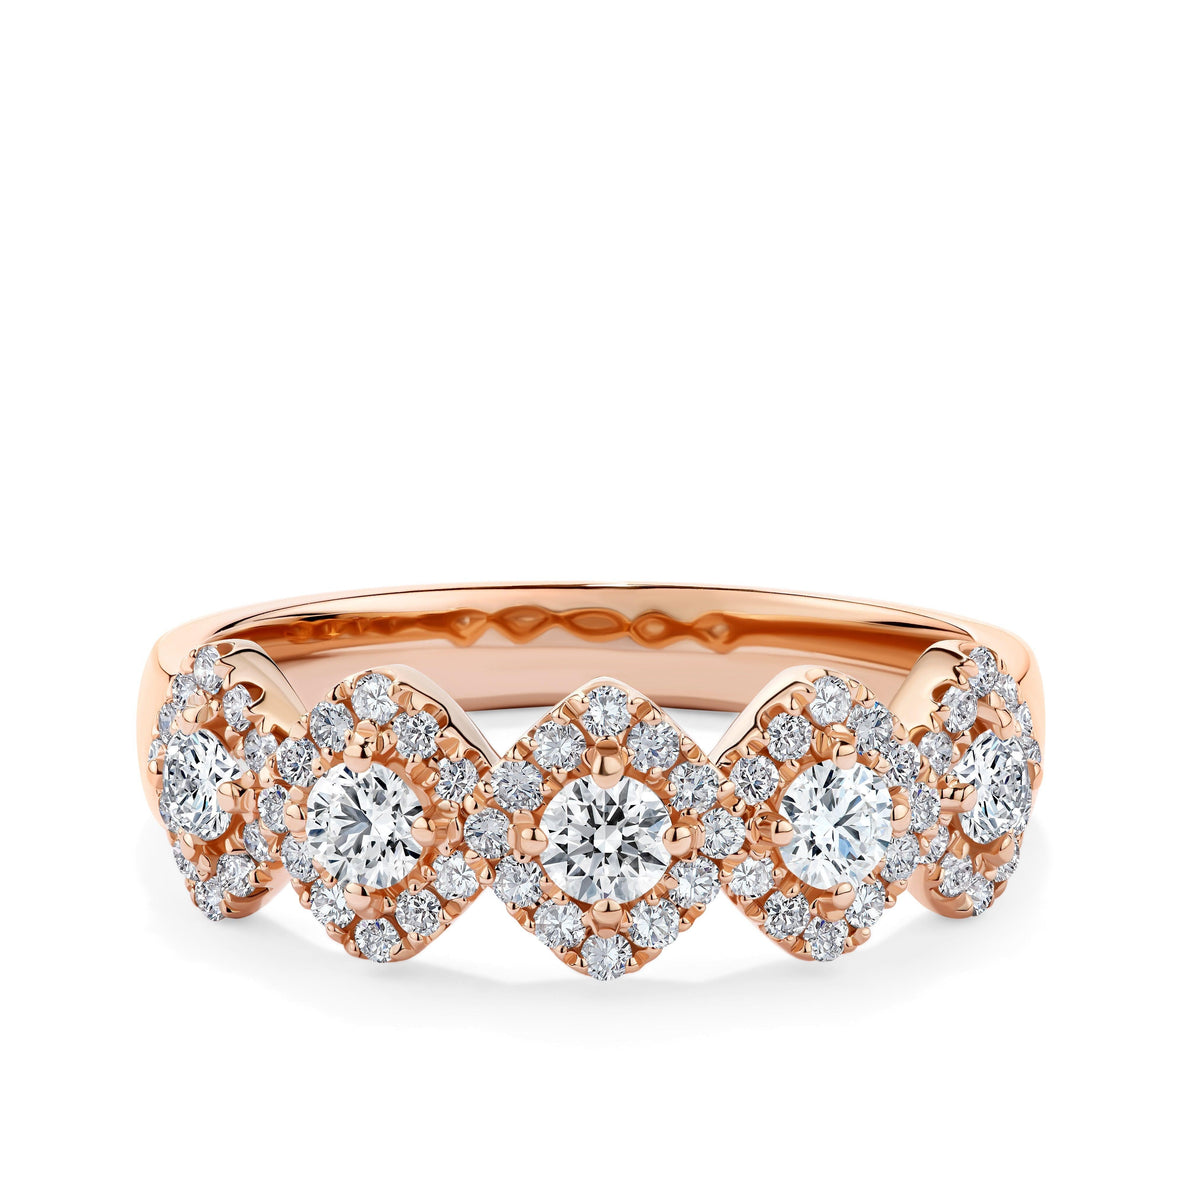 0.75ct TW Round Brilliant Cut Diamond Cluster Ring in 9ct Rose Gold - Wallace Bishop